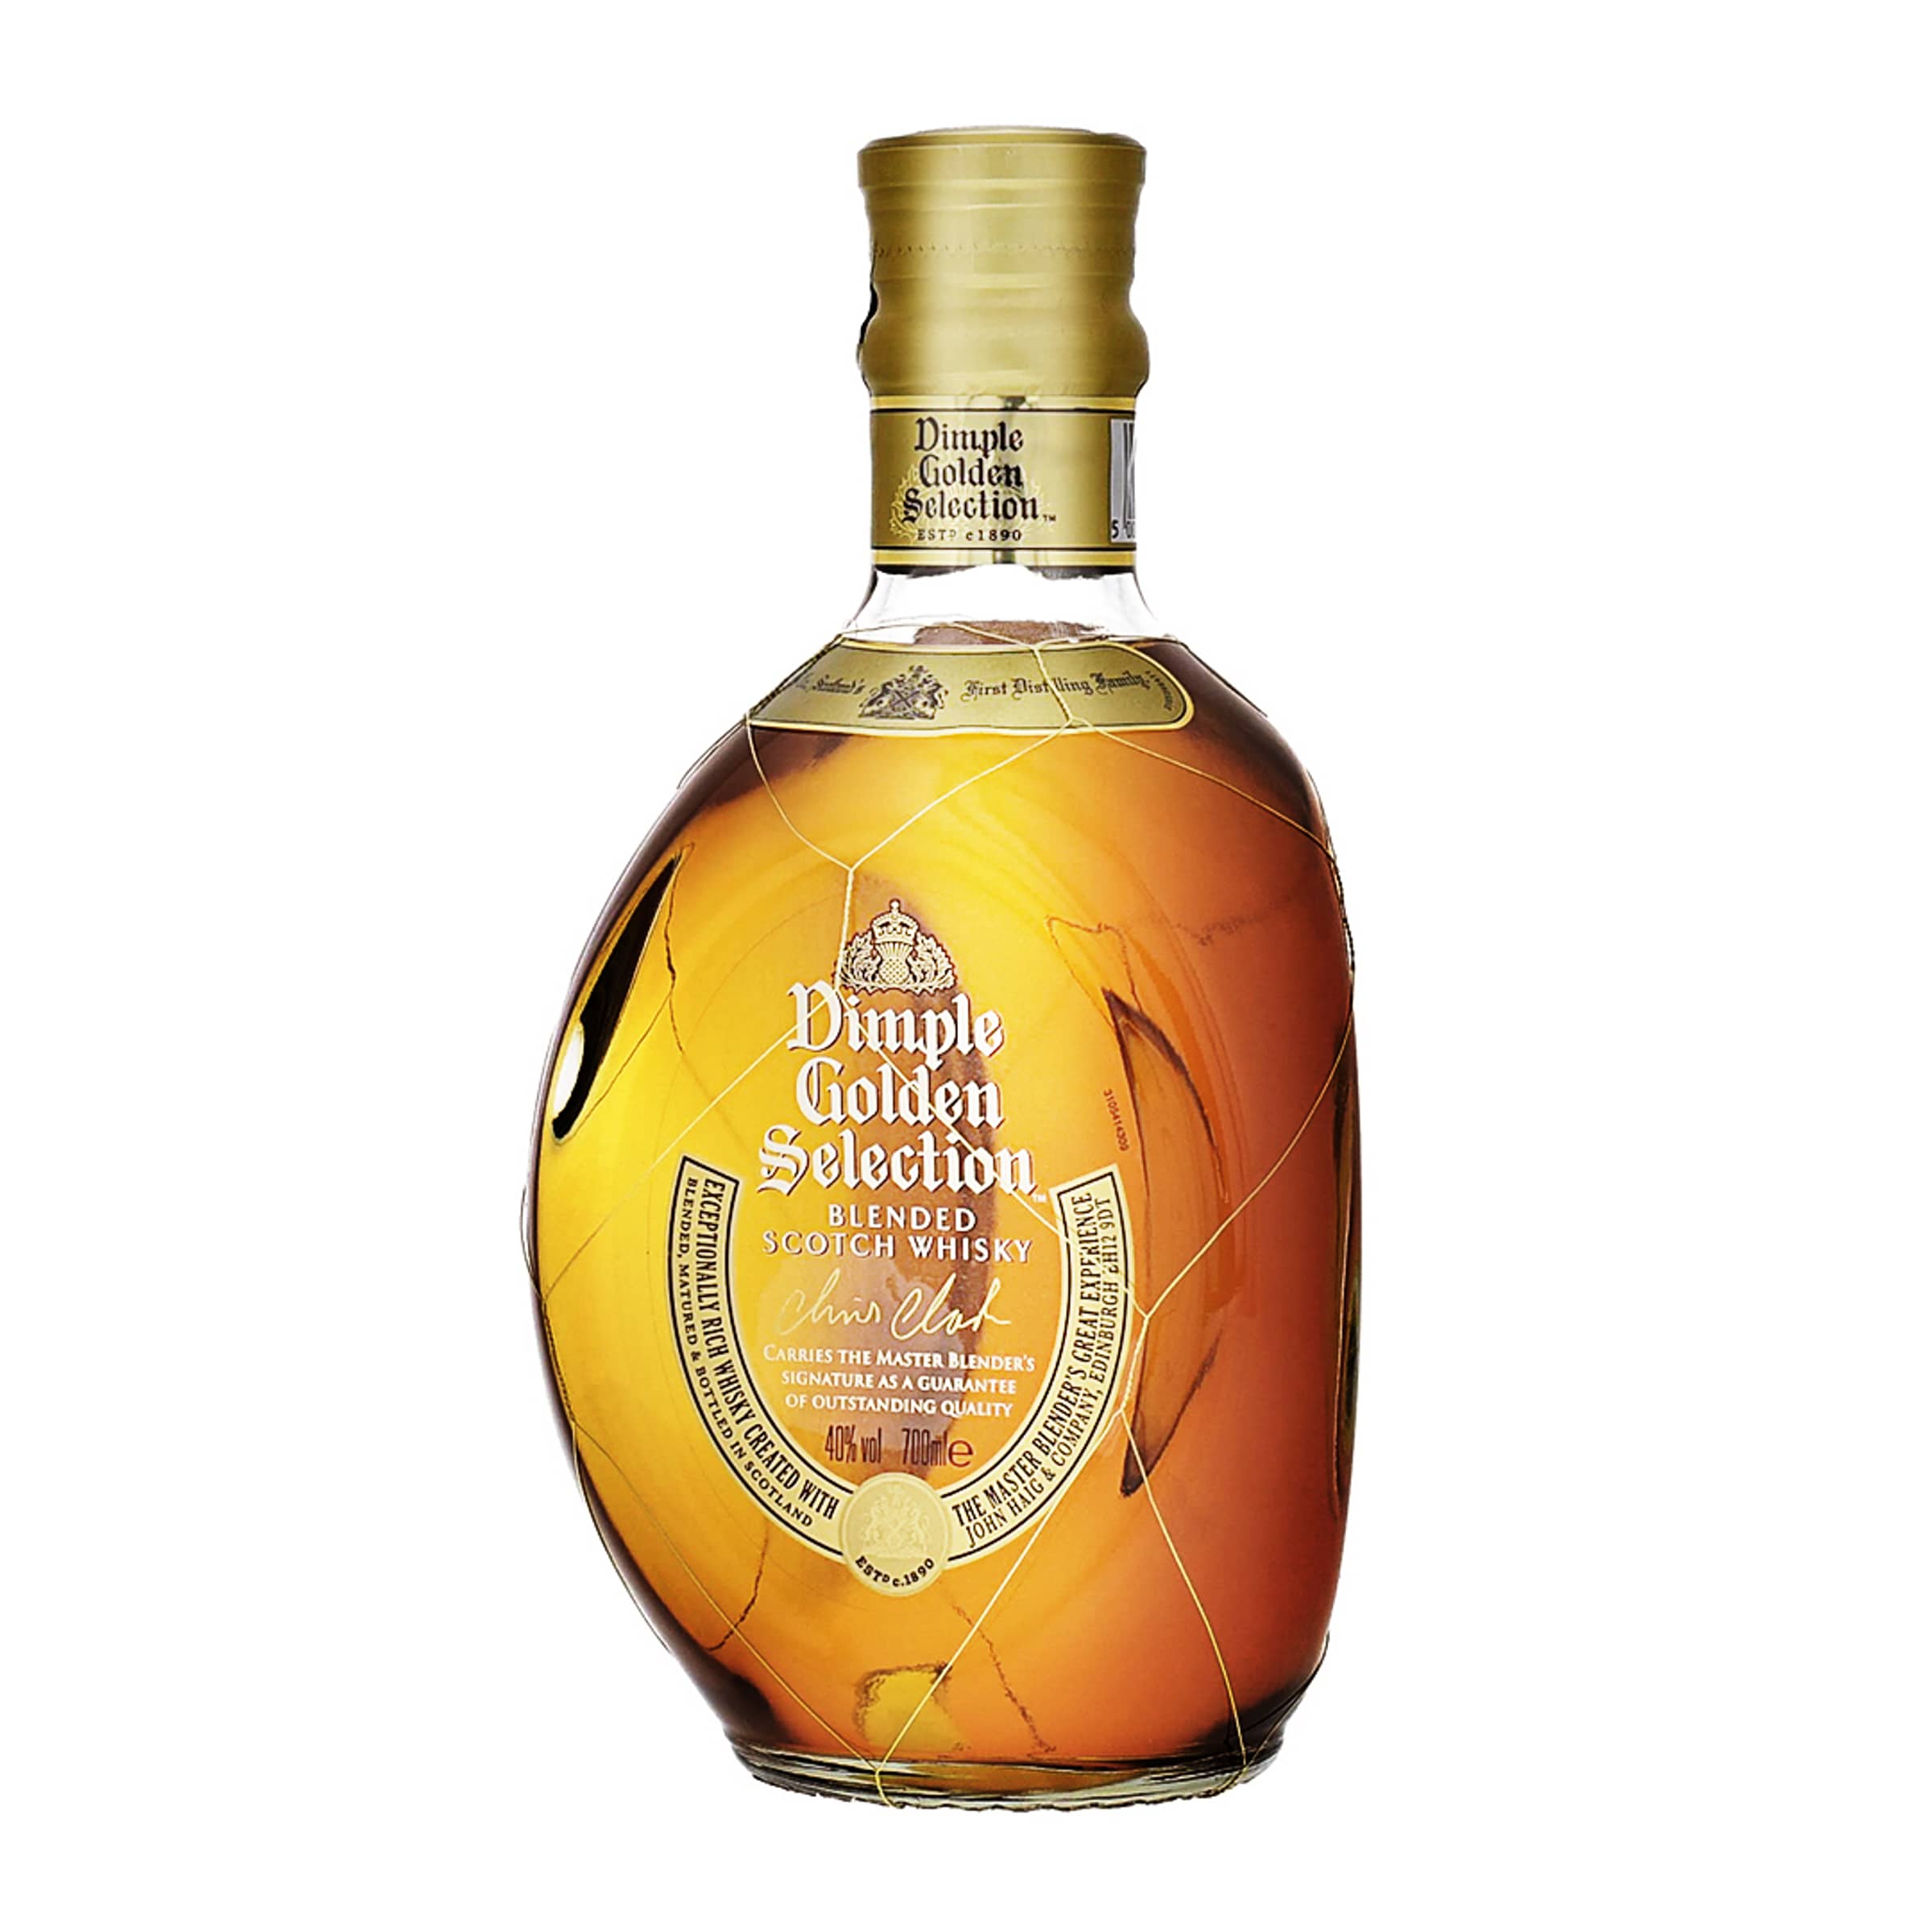 Golden Scotch Whisky Blended Selection 70cl Dimple